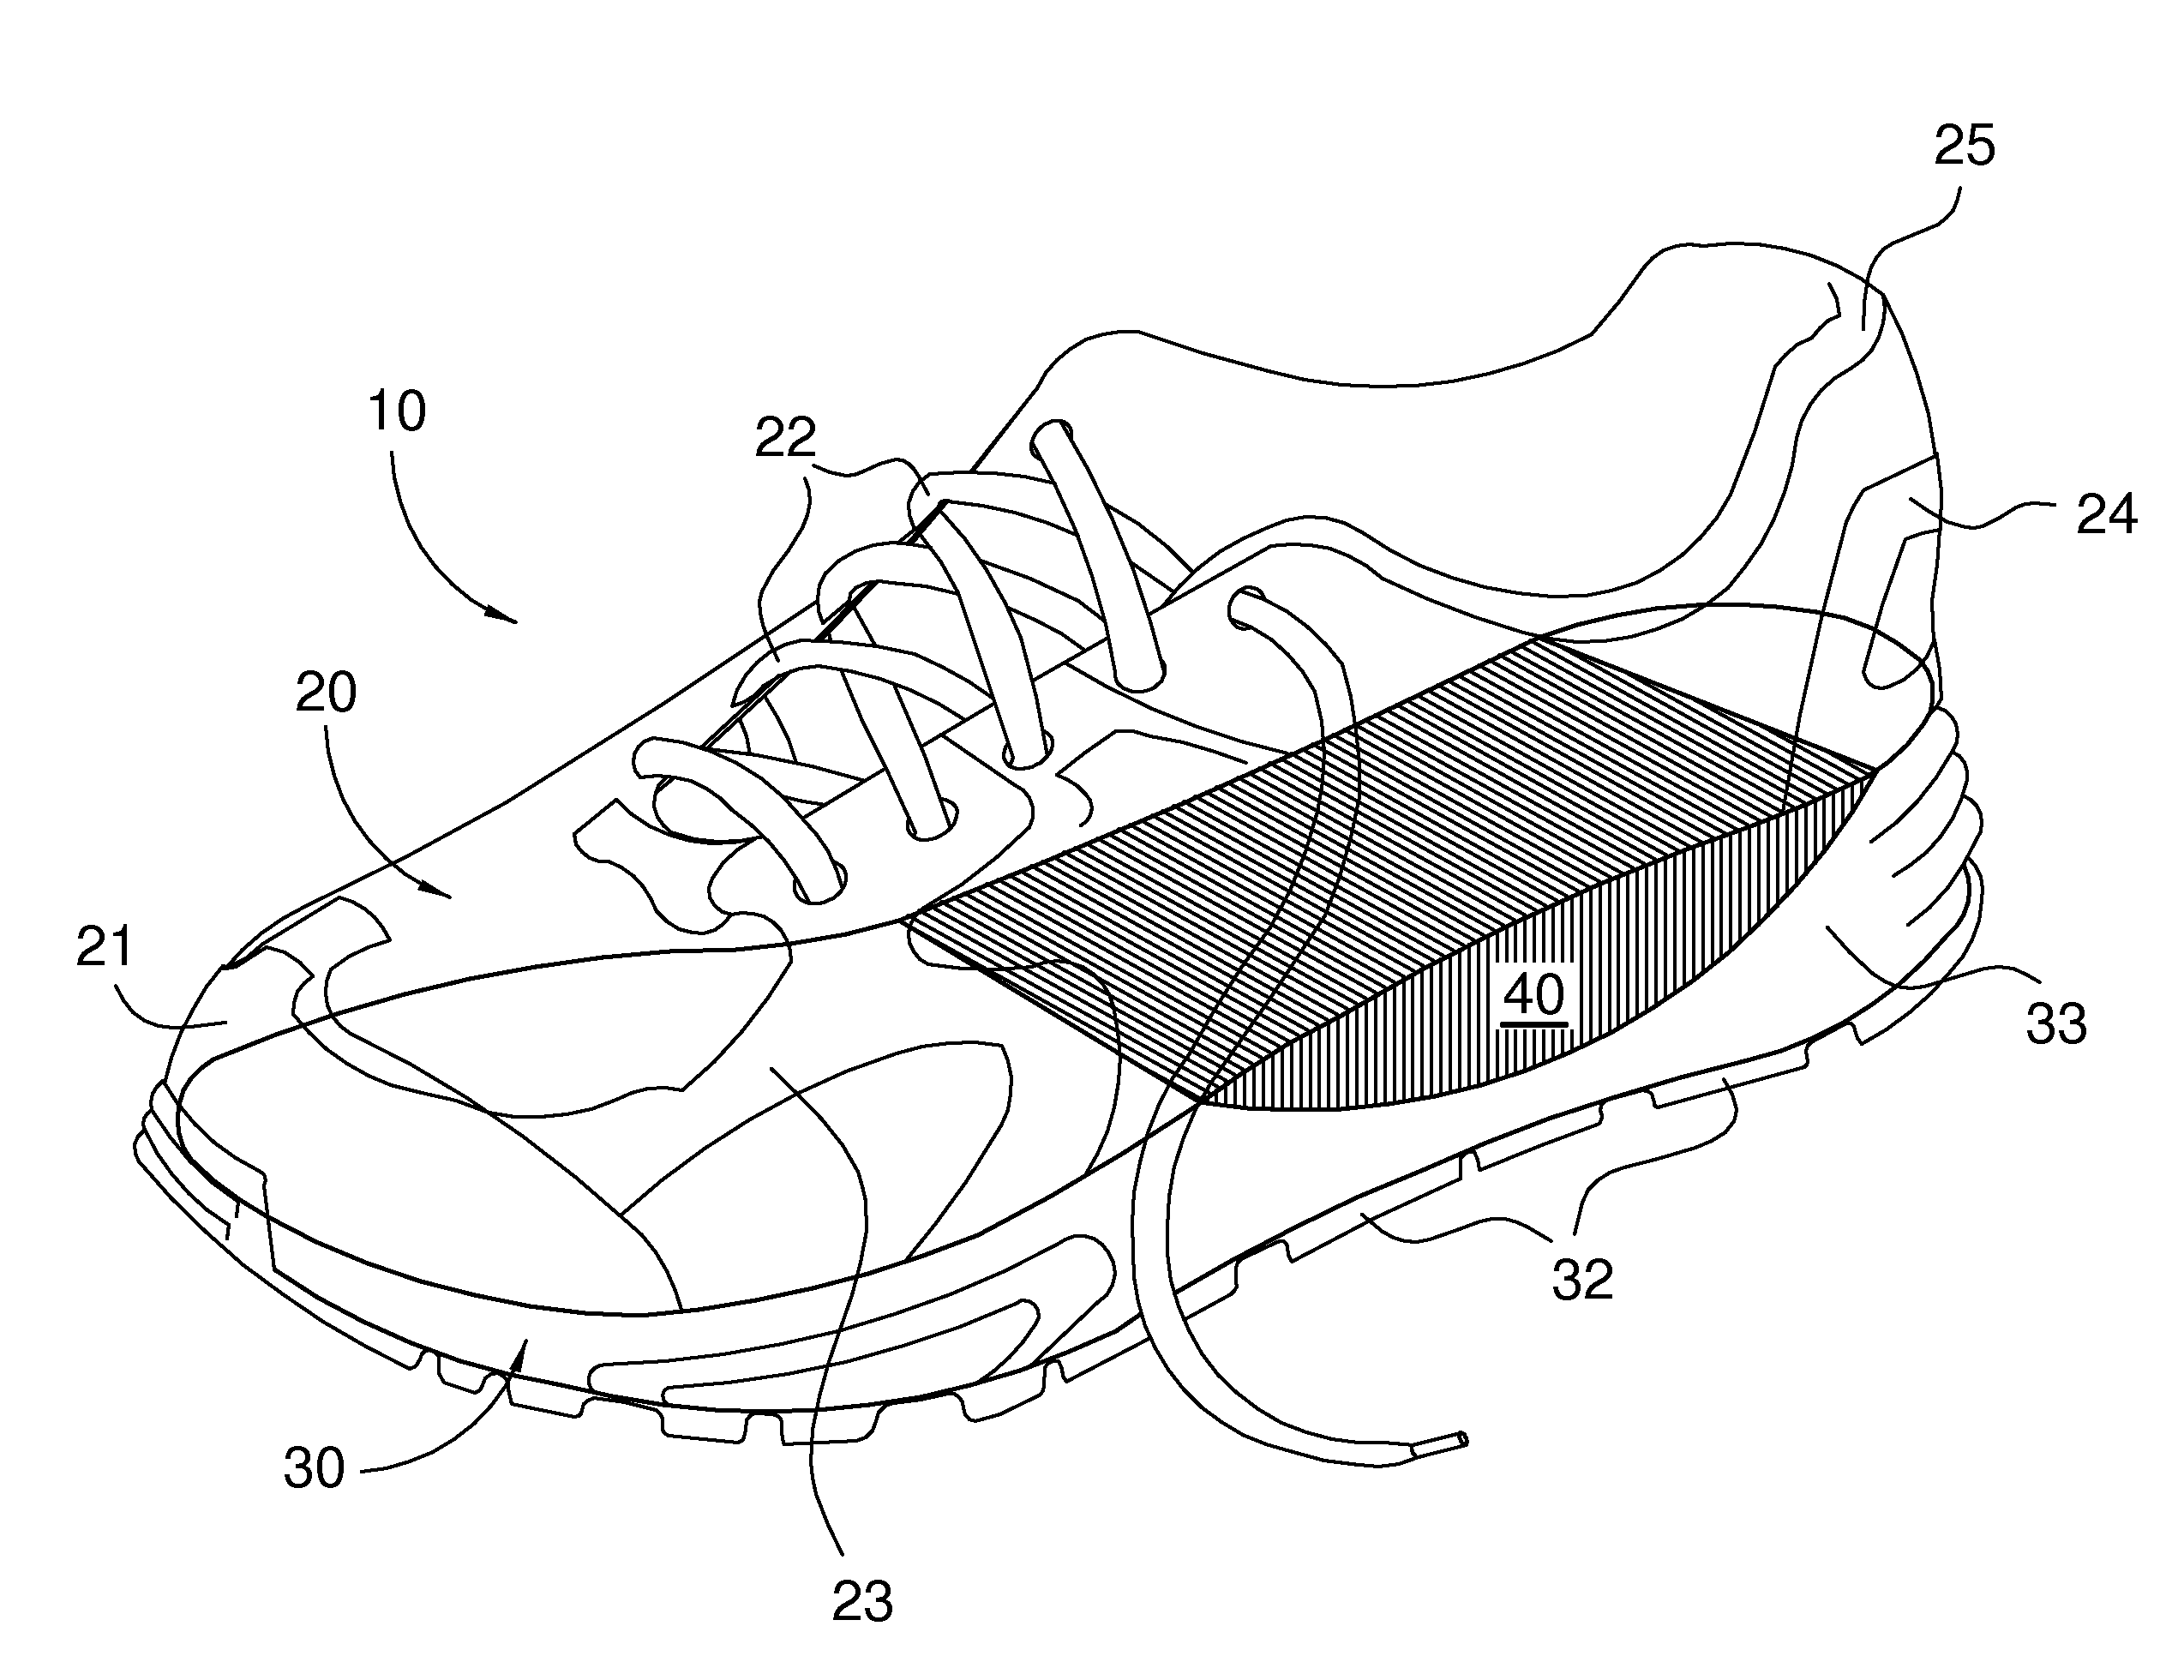 Footwear for walking or running with rolling action